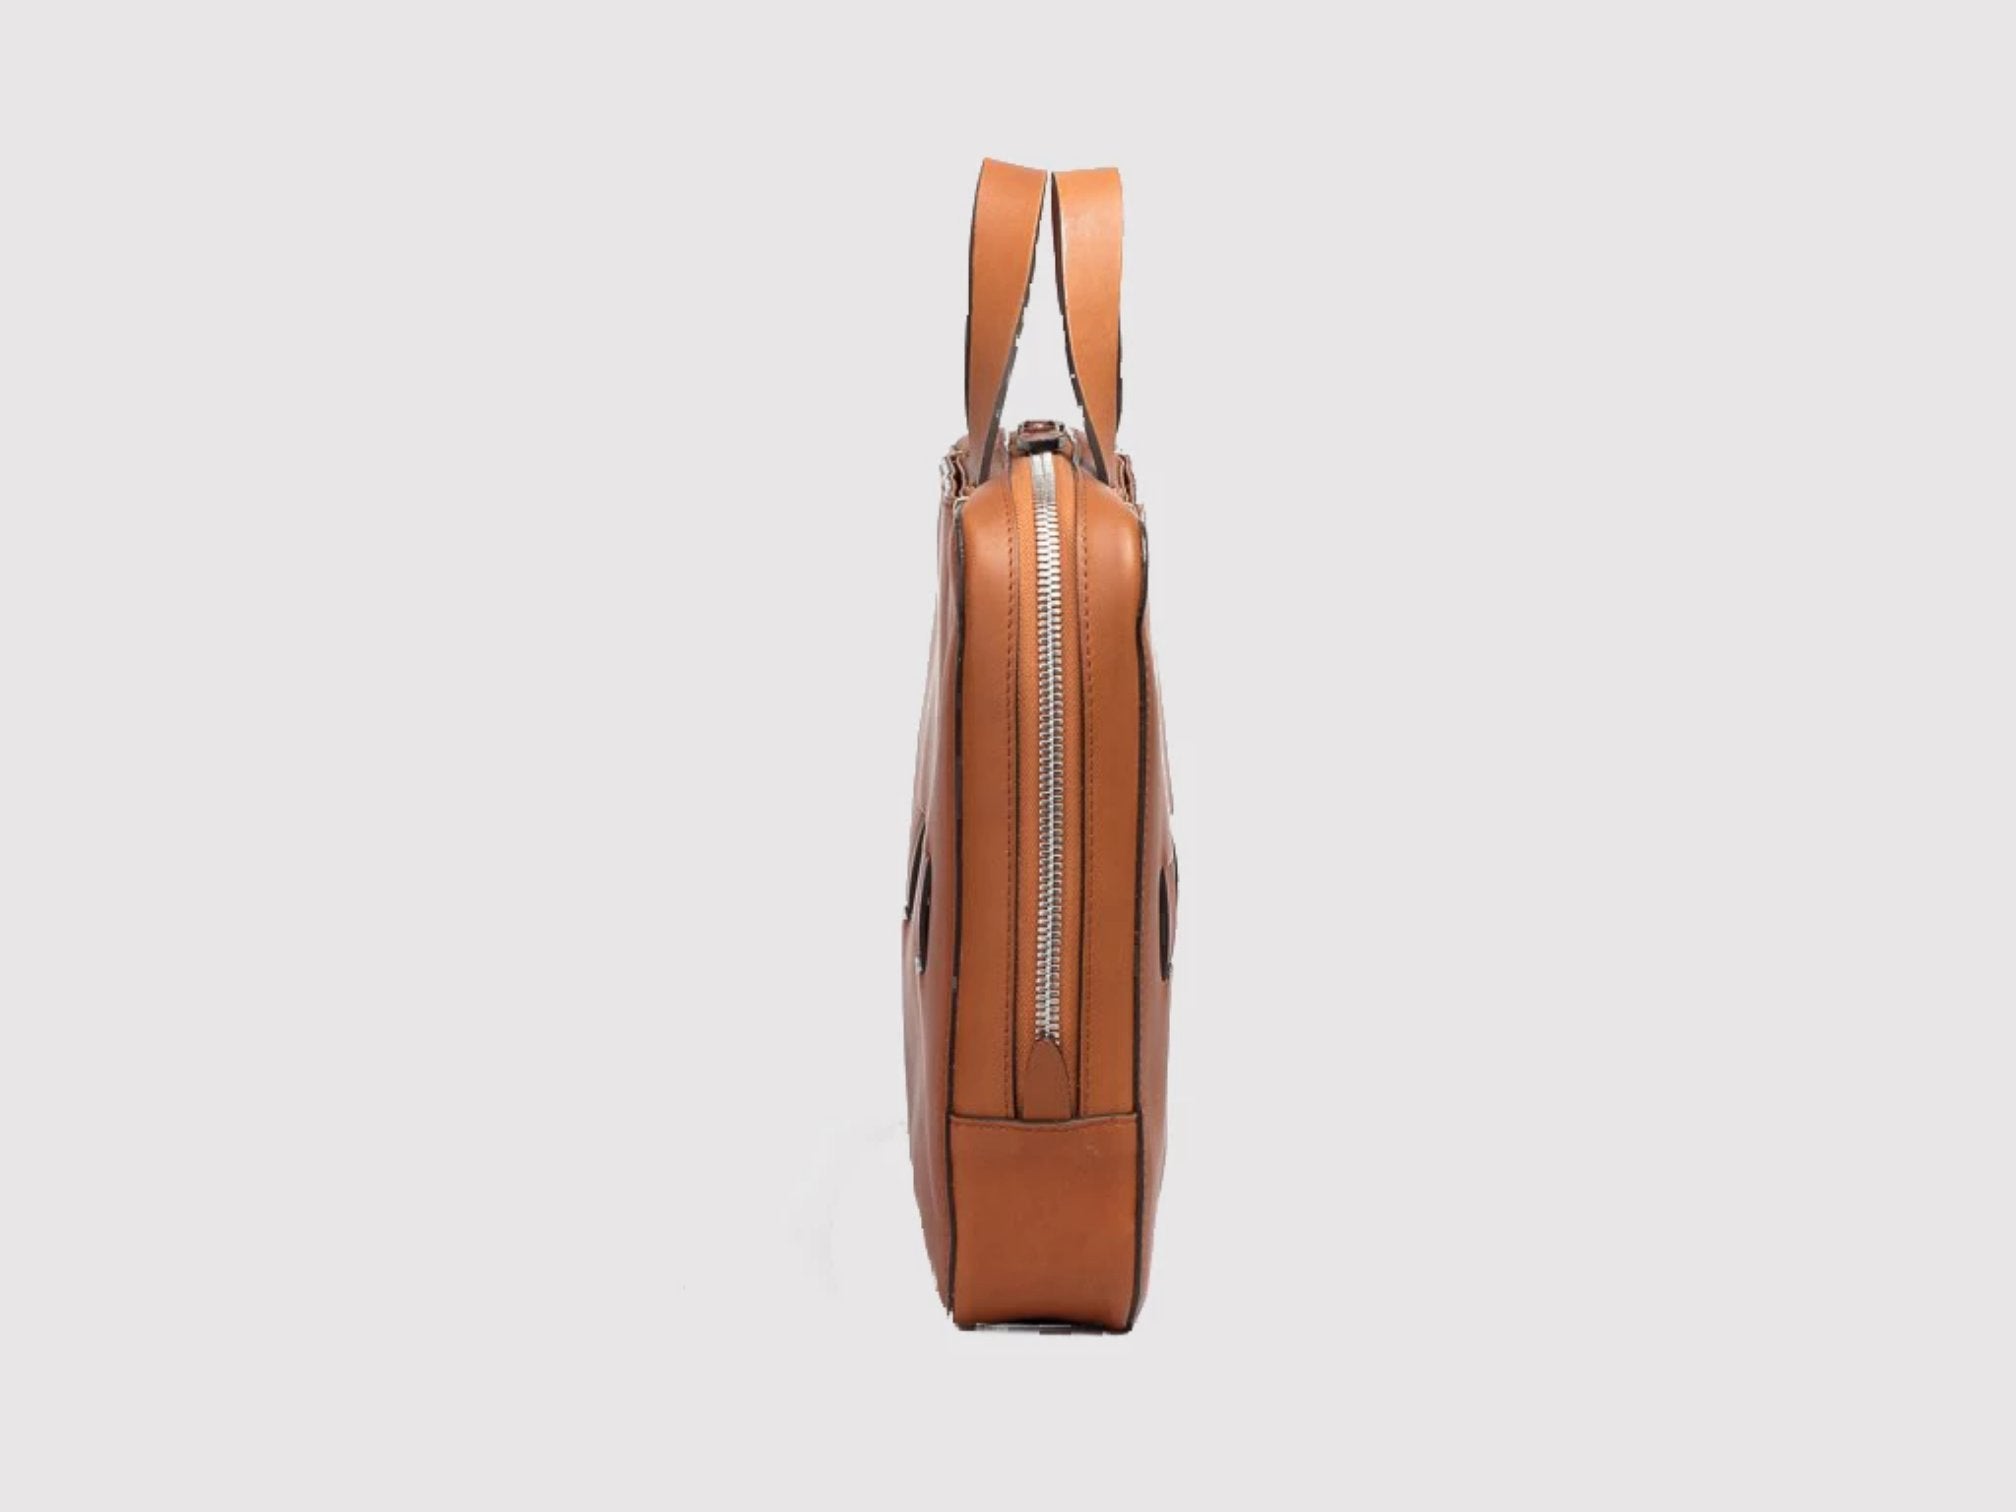 anson calder slim brief french calfskin leather *hover _cognac